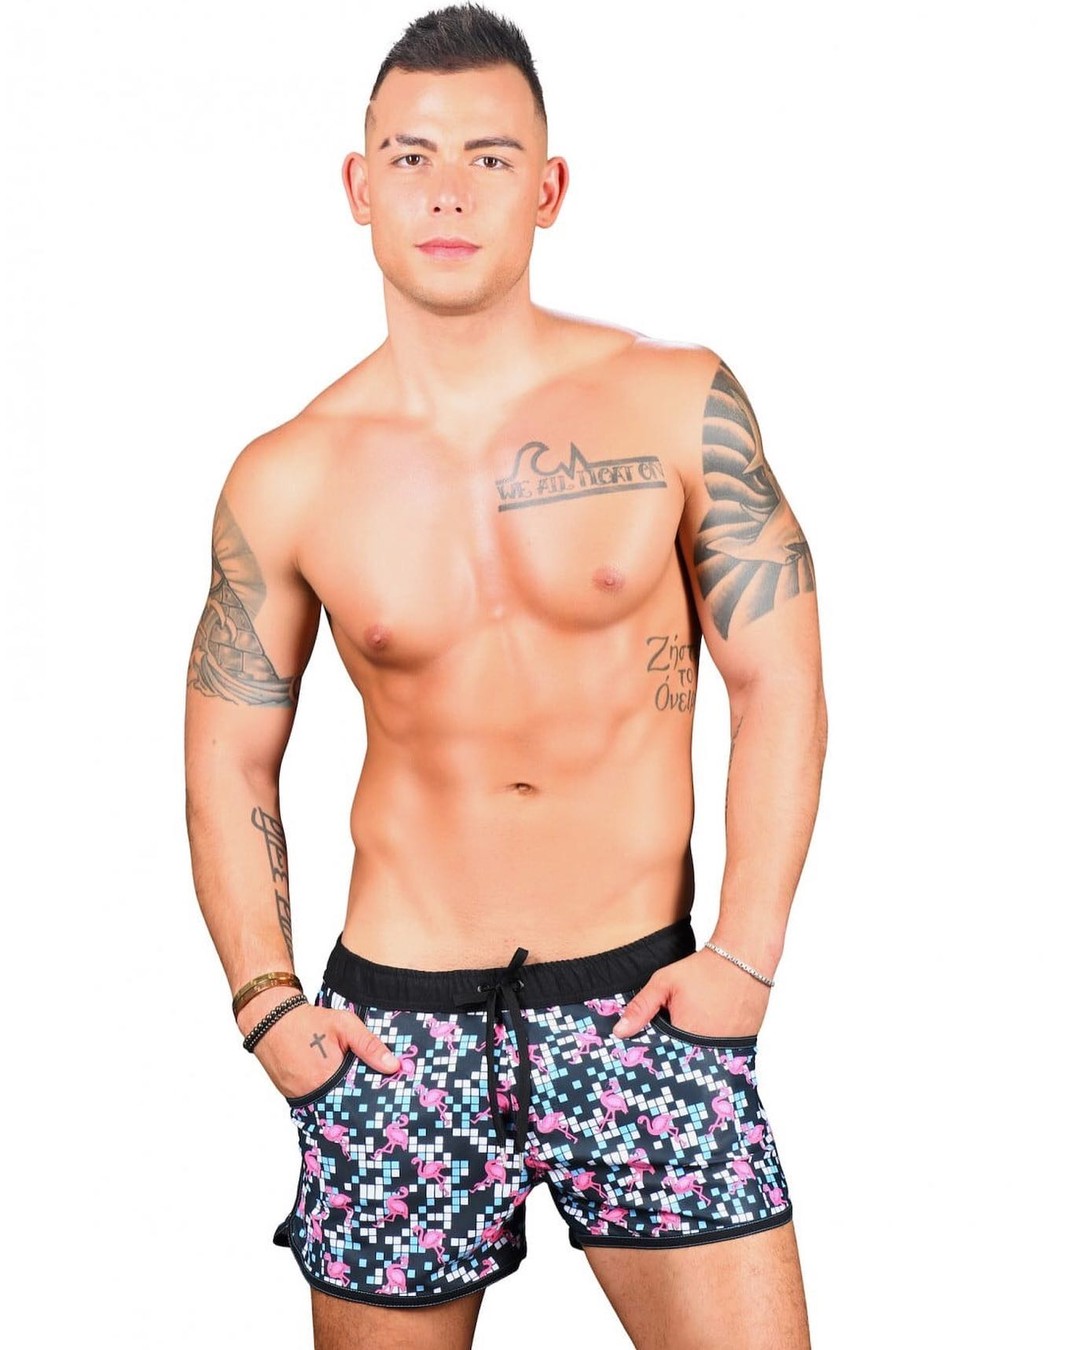 Looking for a cool bargain? Swimwear at 30% off, underwear half price and more at Men and Underwear - The Shop this weekend:
____
https://menandunderwear.com/shop/sales